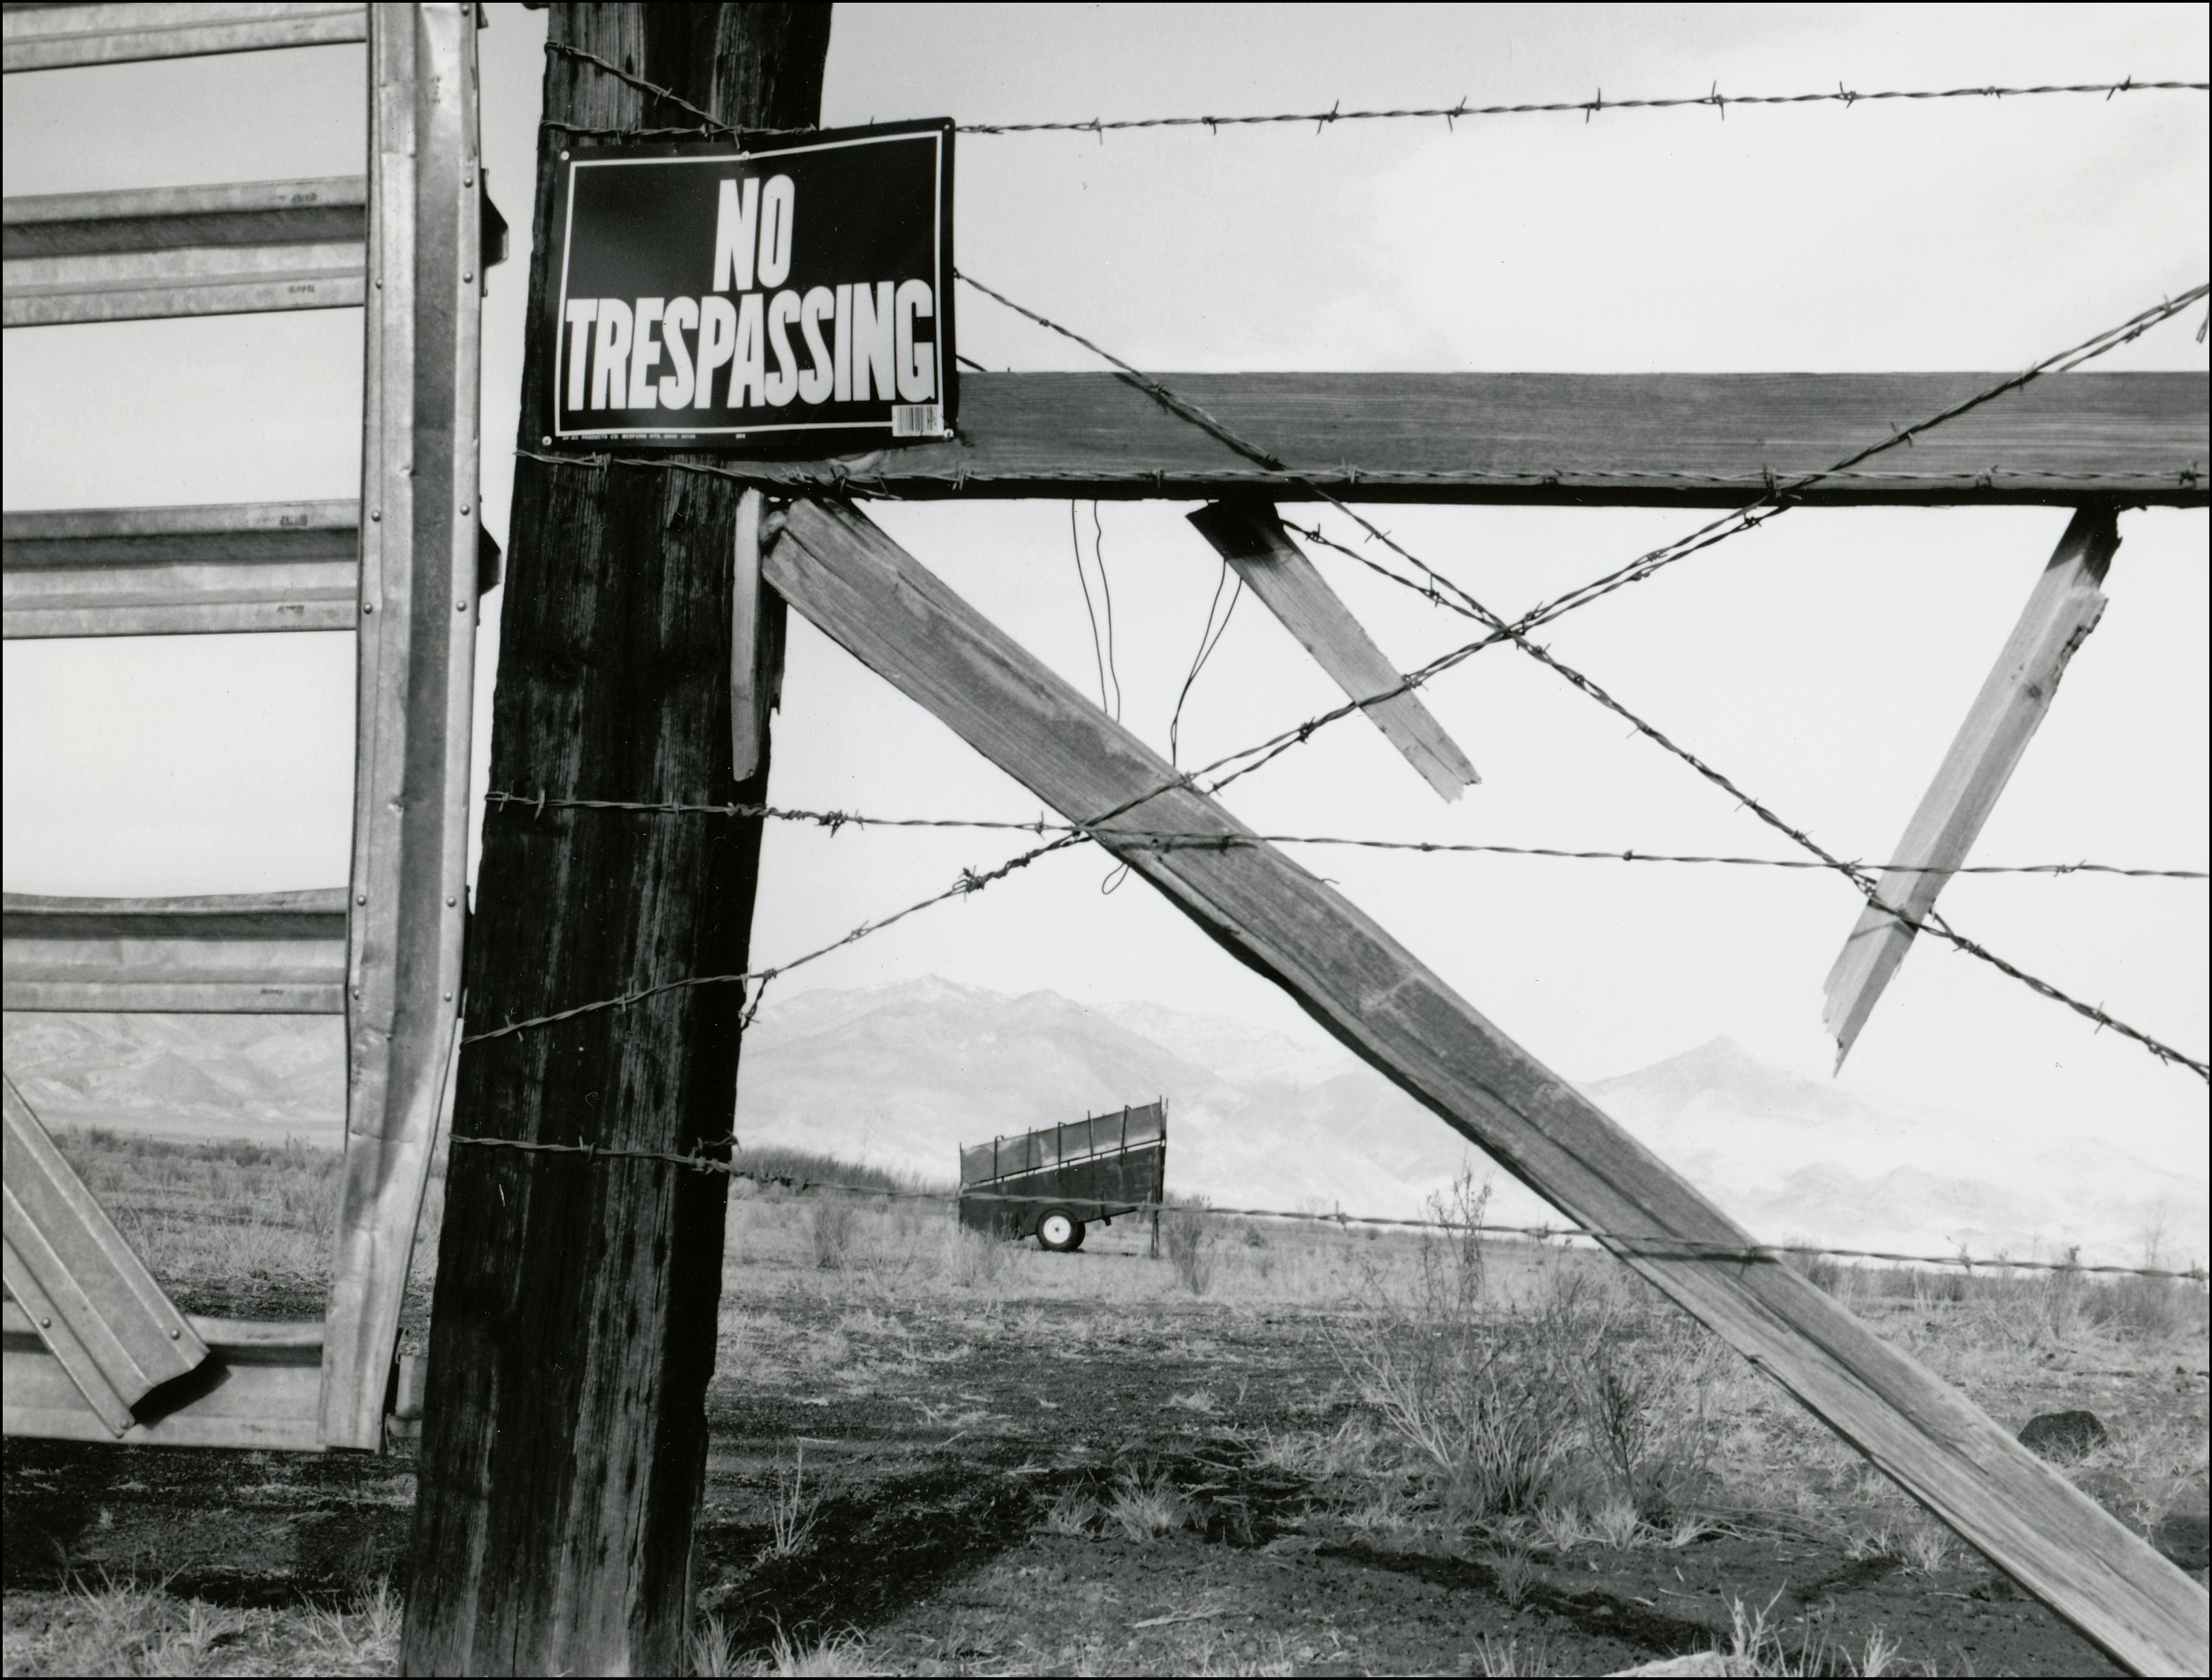 Part of gate and barbed wire fence with no trespassing sign. Portable loading chute in the pasture in the background.